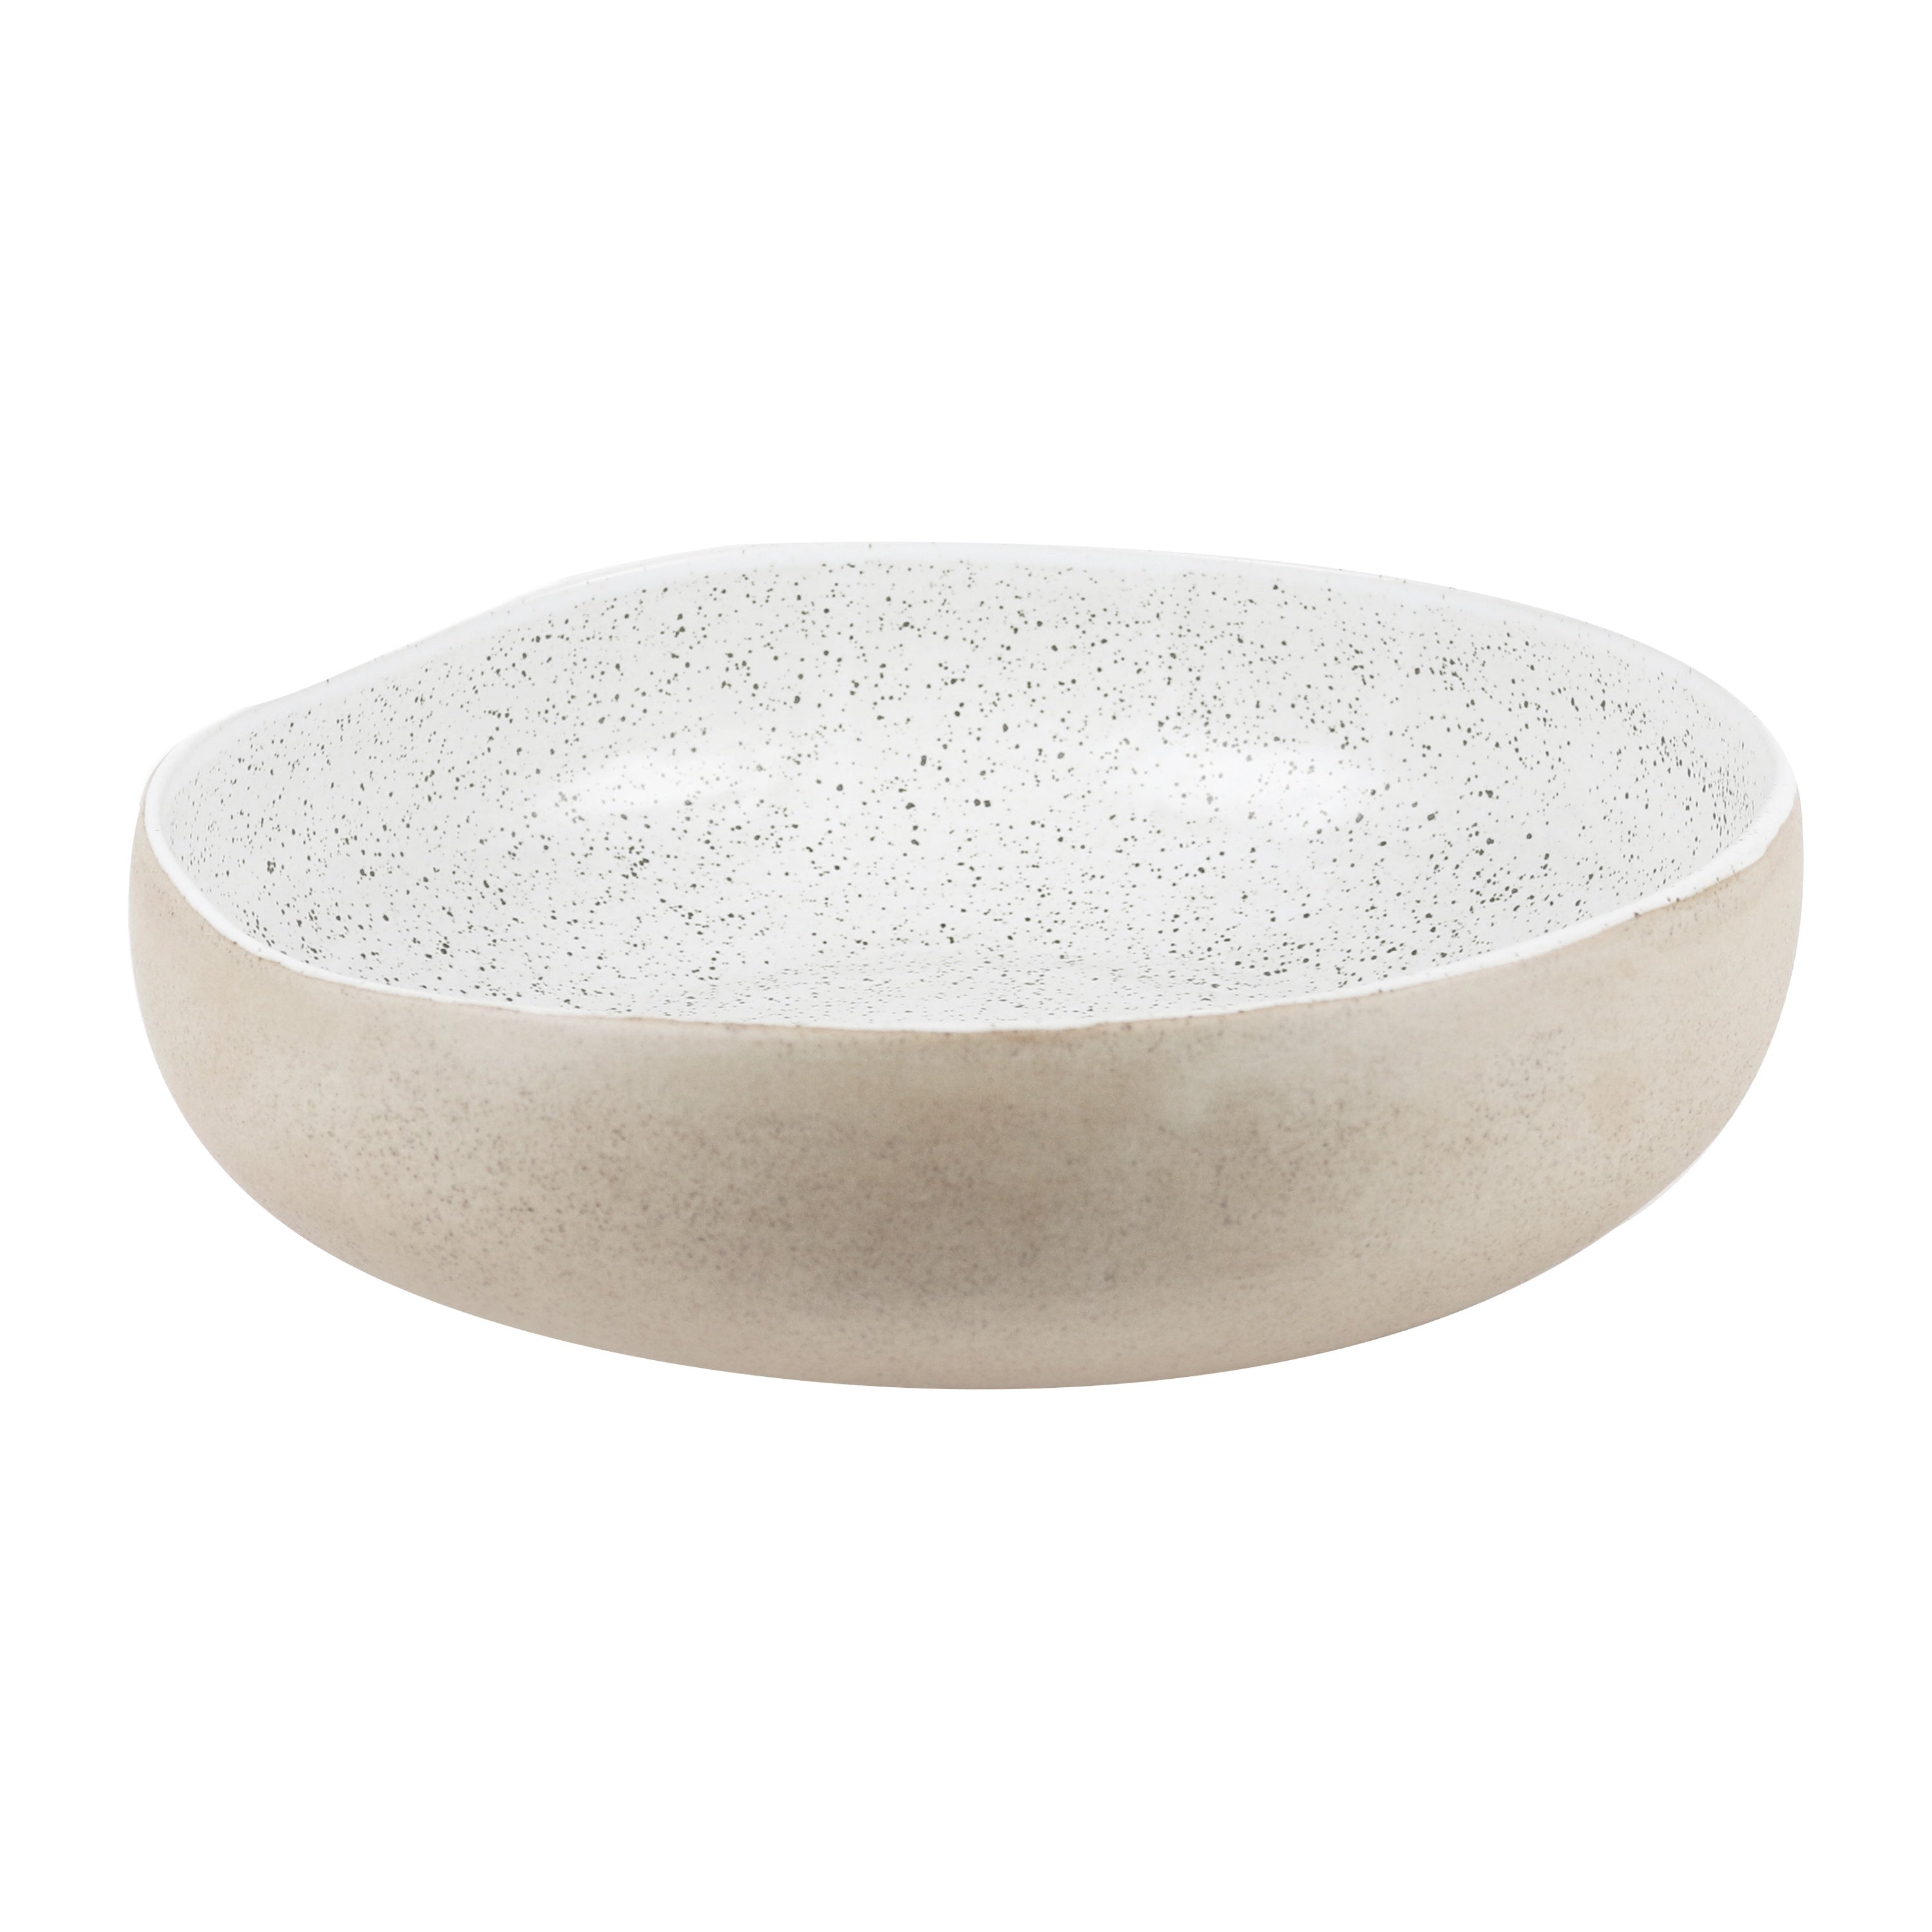 Serving Bowl Small | White Garden to Table